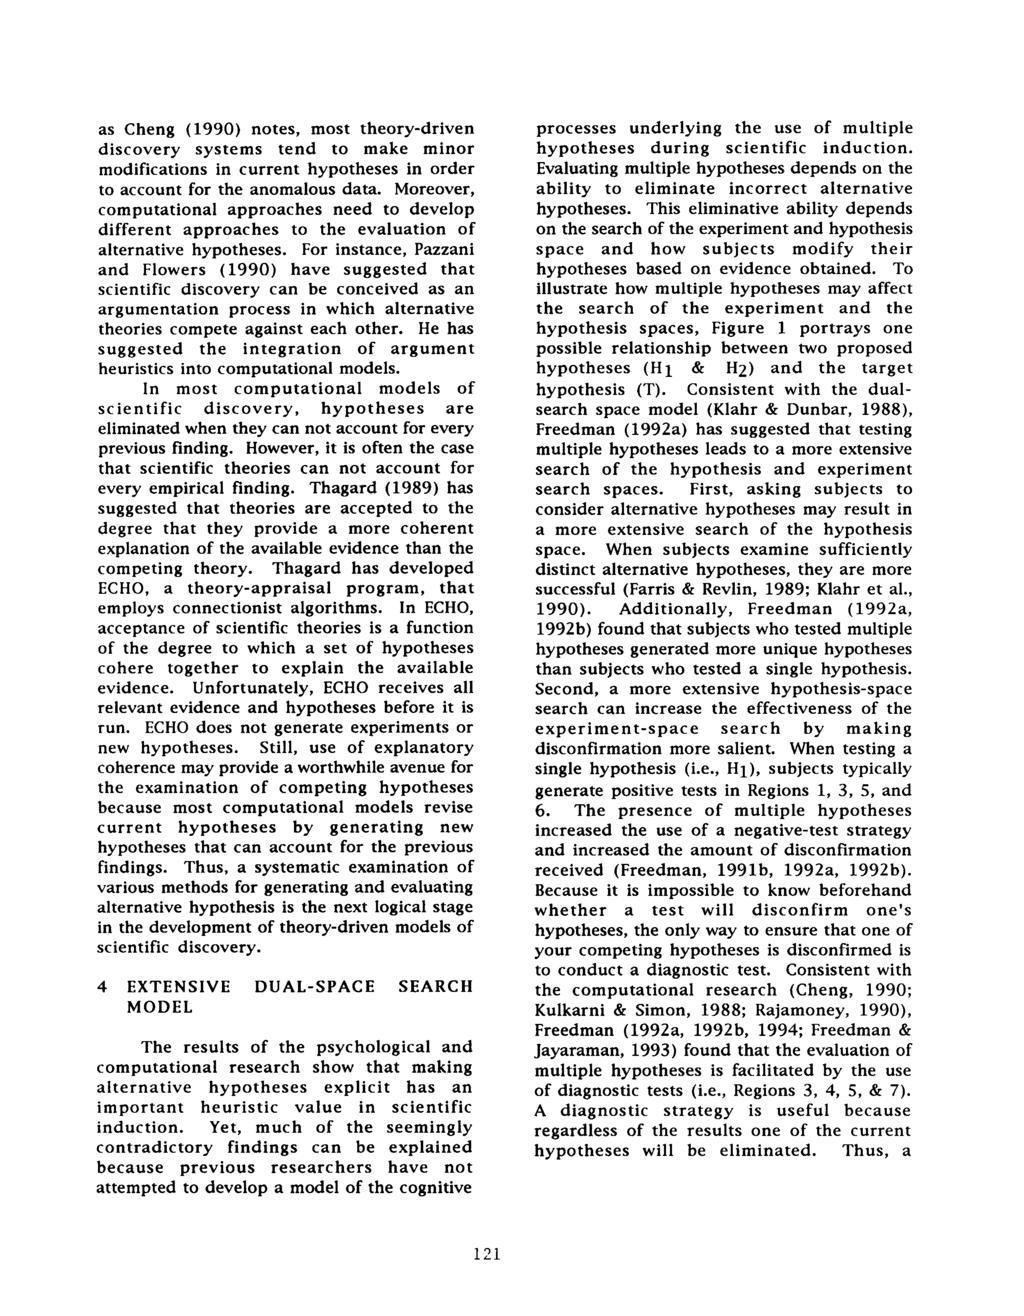 as Cheng (1990) notes, most theory-driven discovery systems tend to make minor modifications in current hypotheses in order to account for the anomalous data.